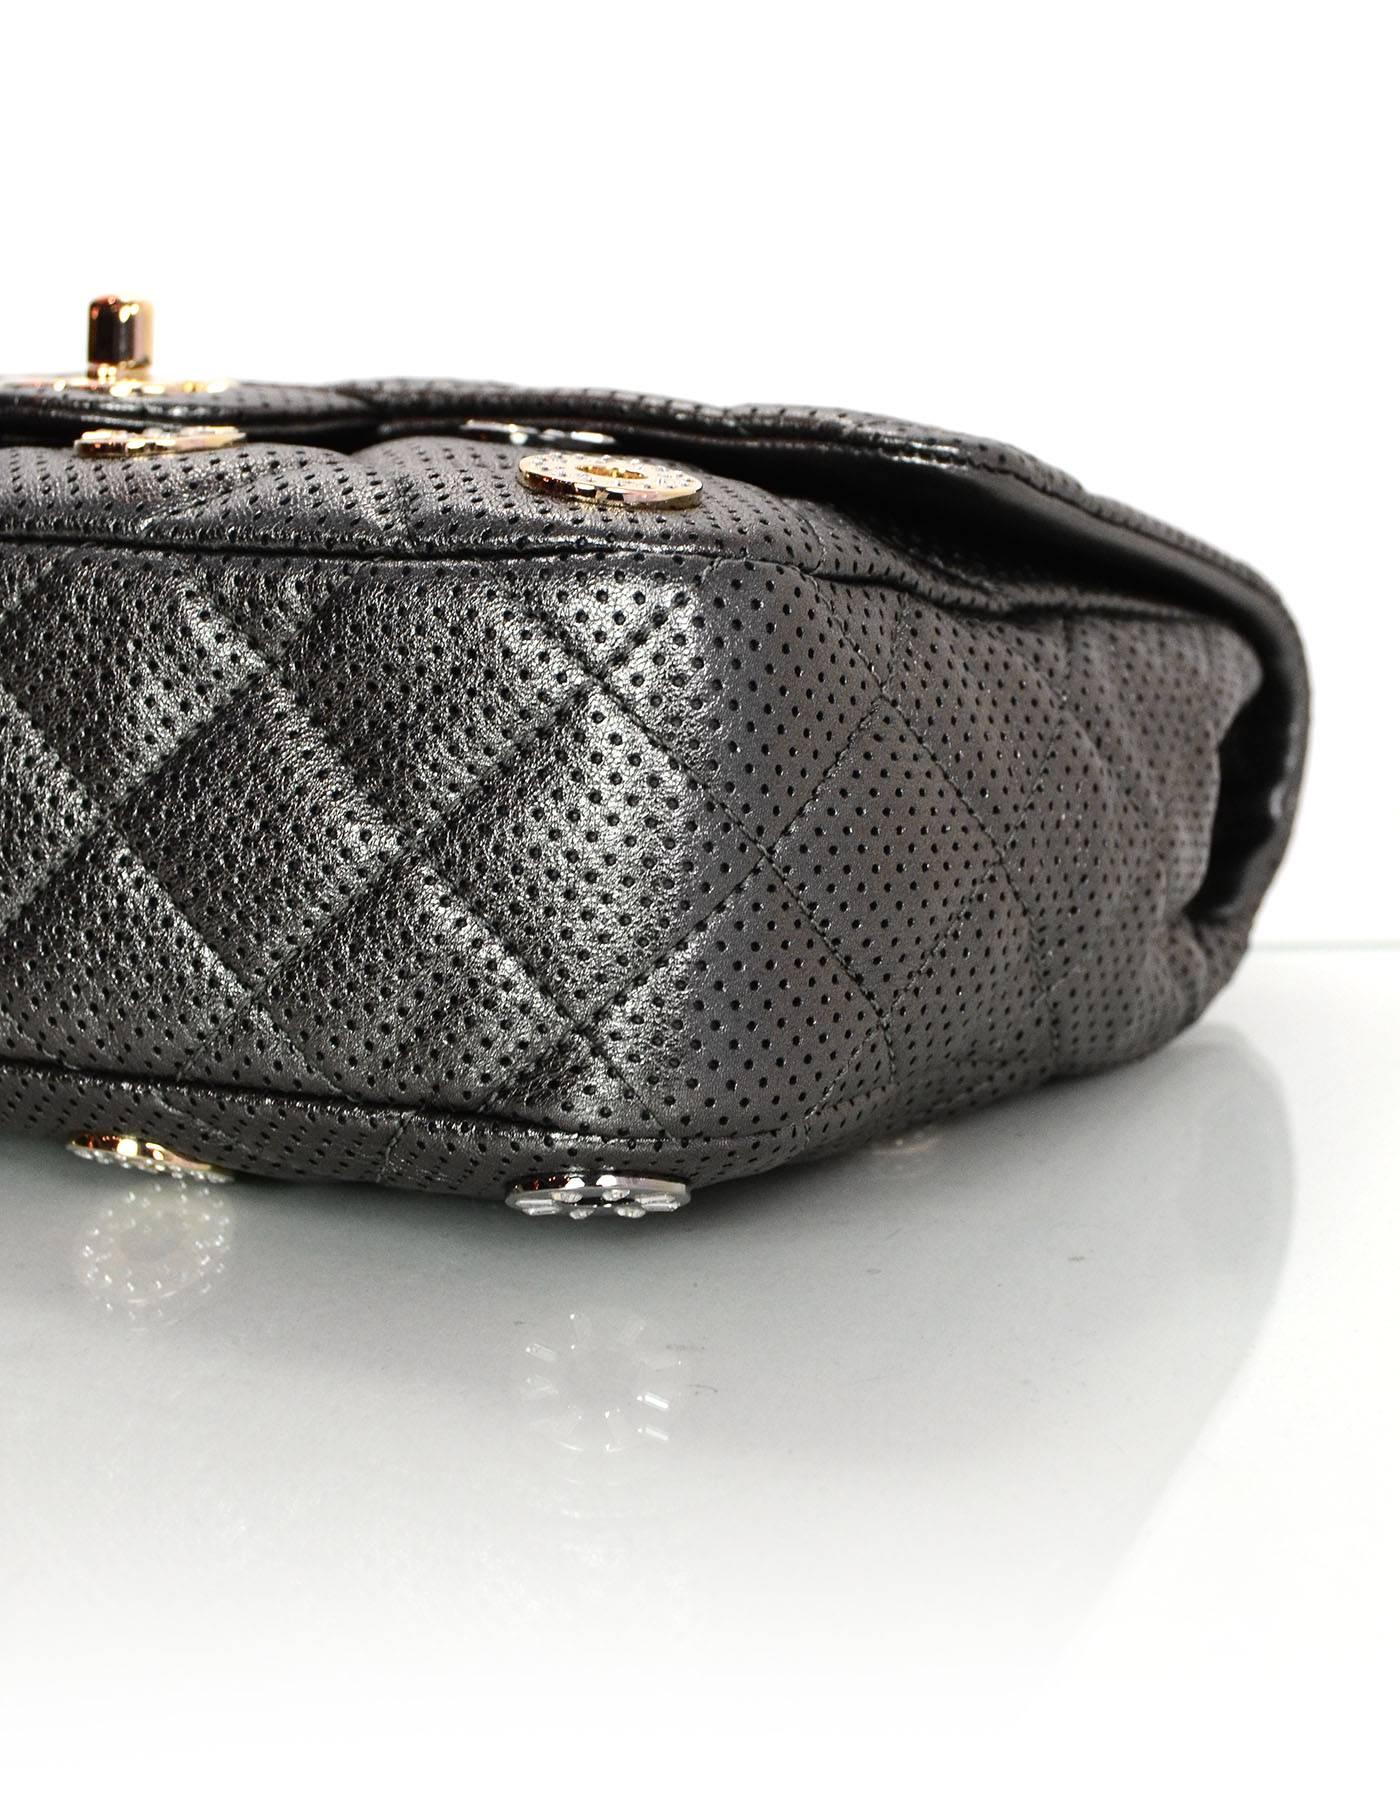 Women's Chanel Pewter Perforated Leather CC Medals Flap Bag